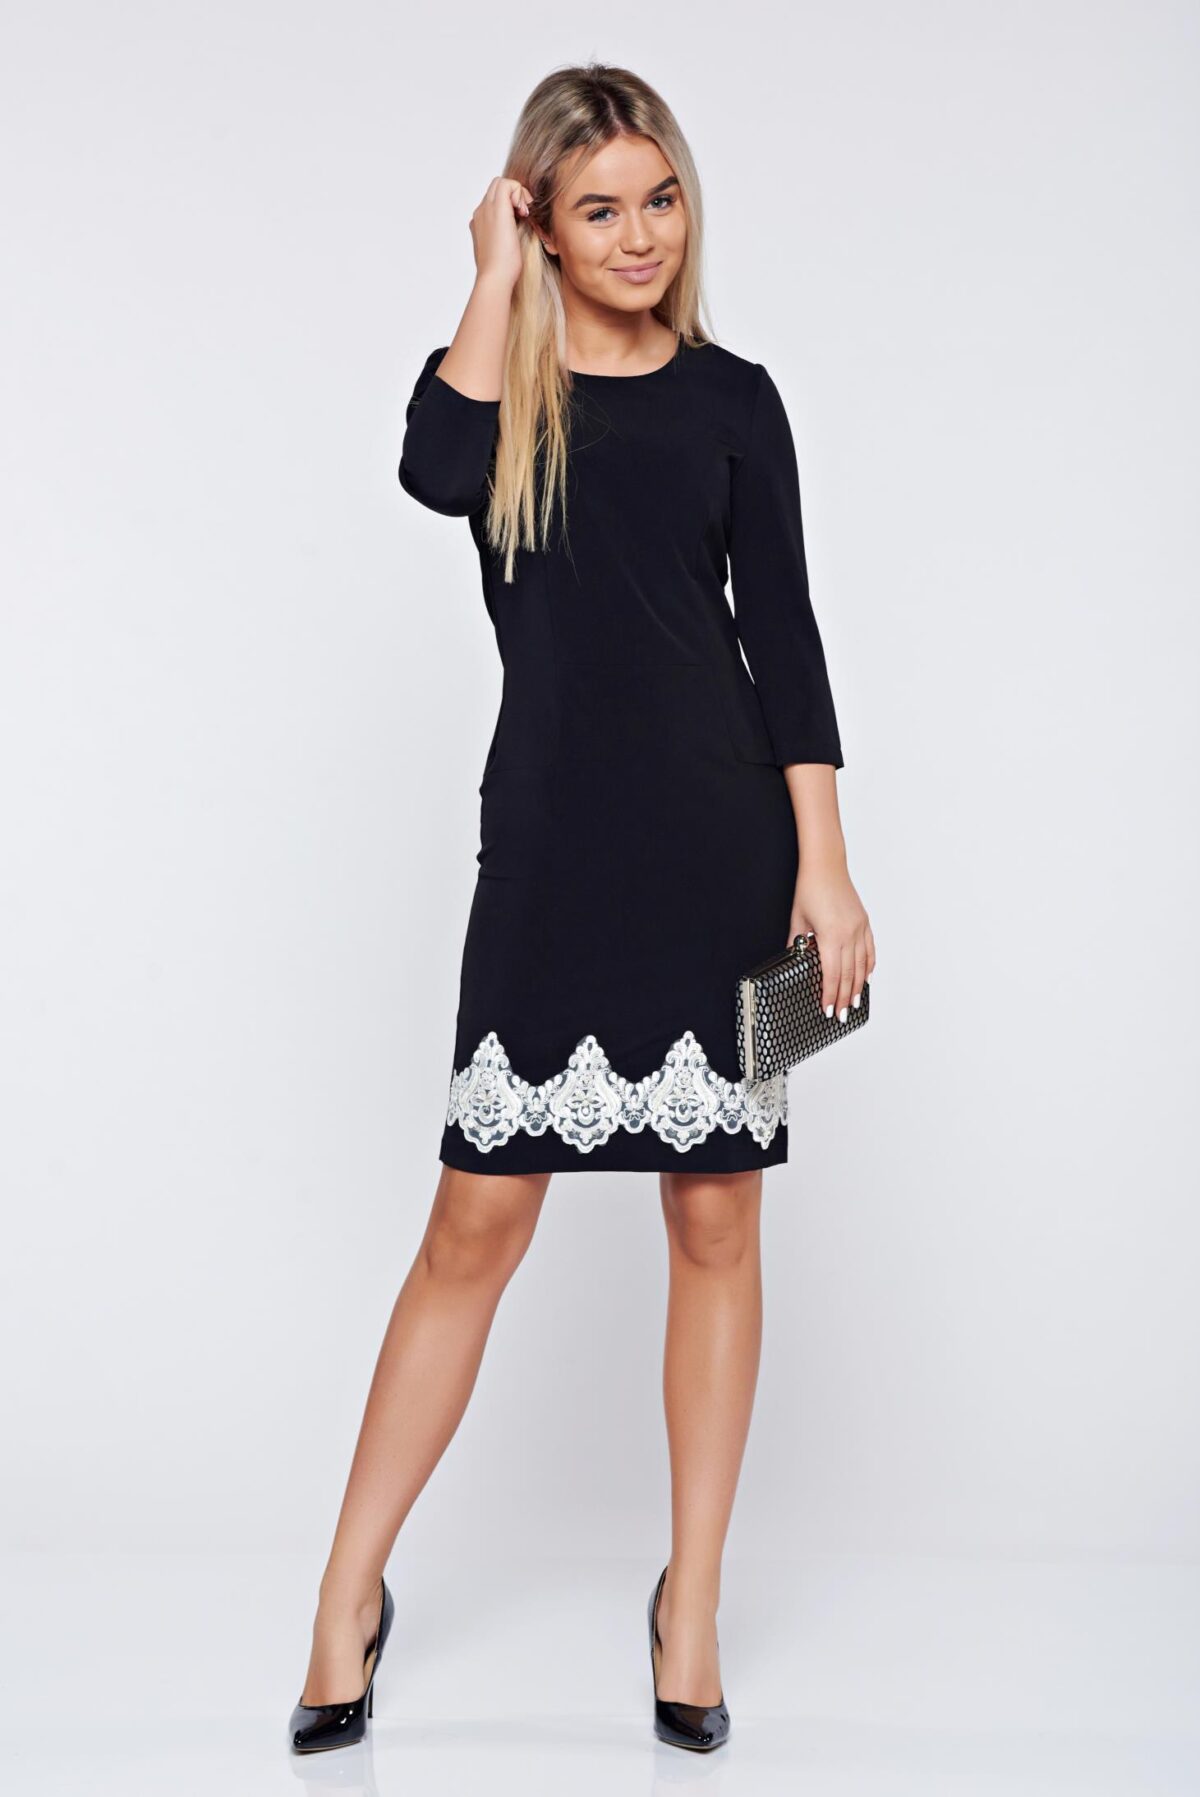 Black Elegant Pencil Dress With Embroidery Details